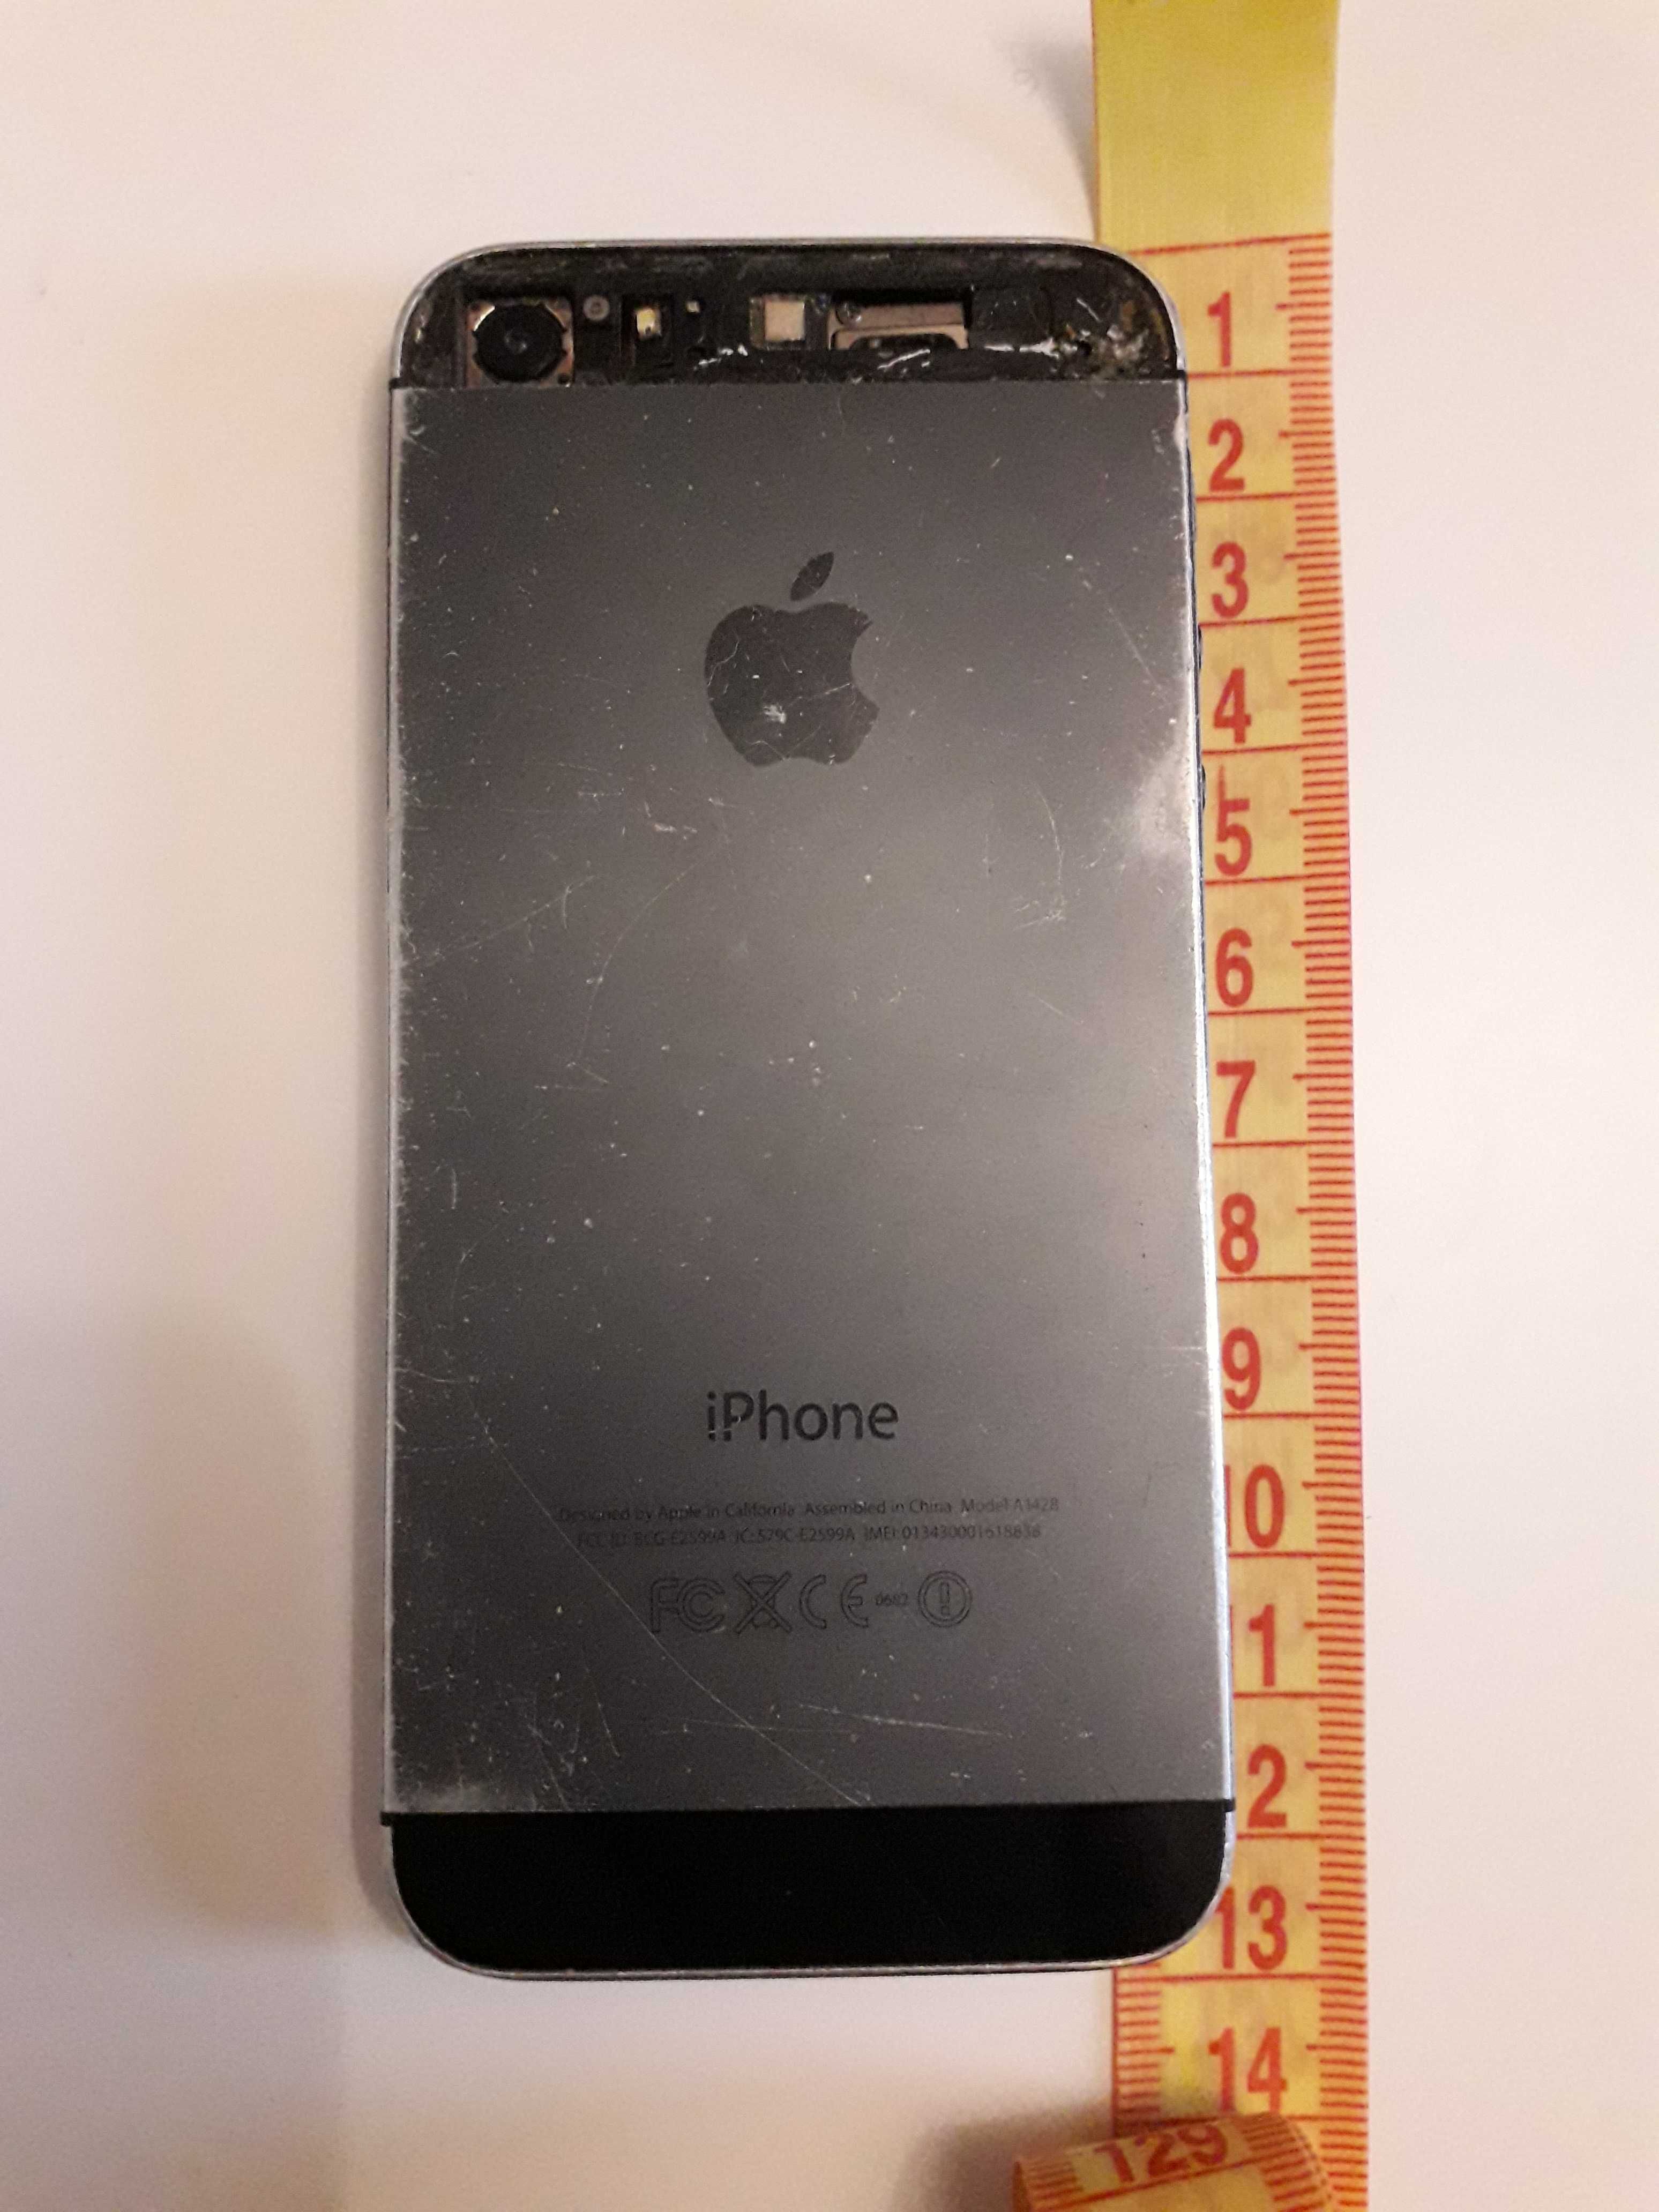 Apple iPhone 5s 16GB A1533